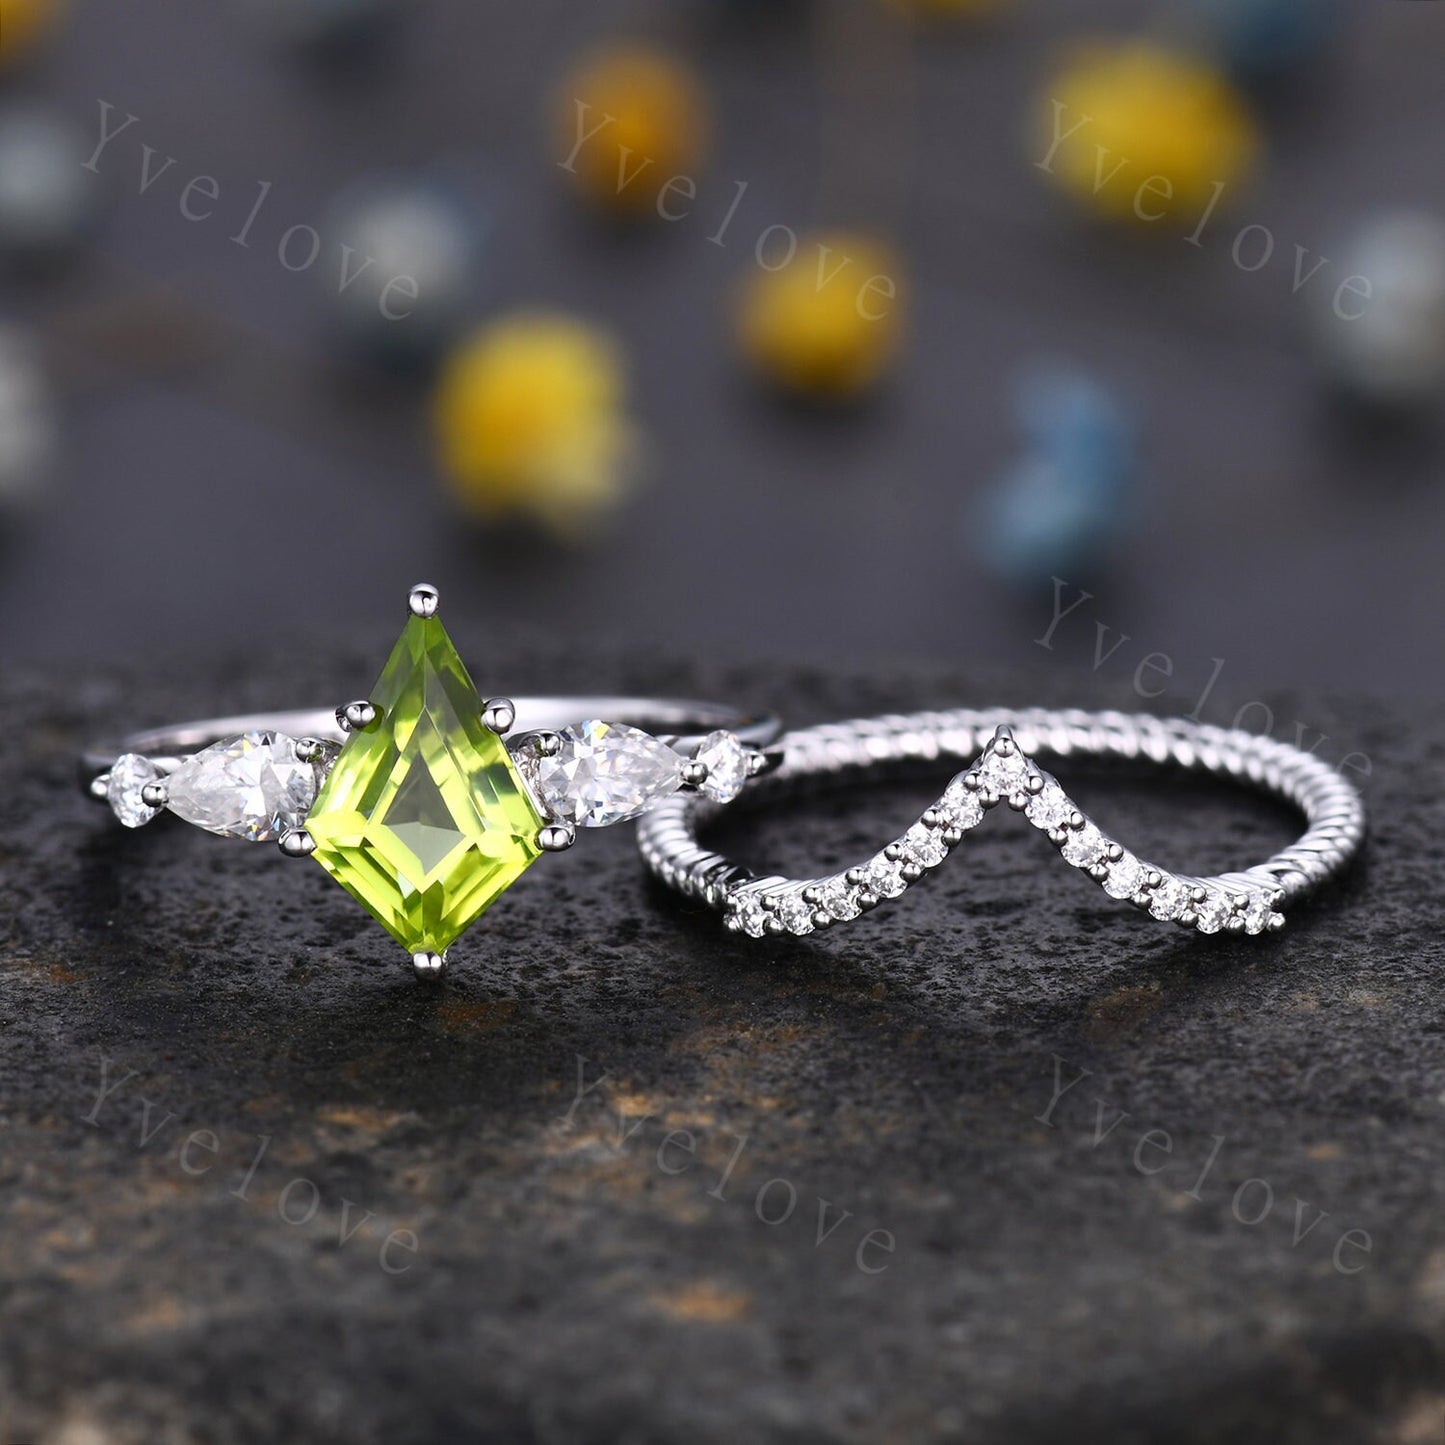 Vintage Kite Shaped Peridot Ring,Sterling Silver Ring Set,Peridot Engagement Ring,Promise Ring,Green Gemstone,Anniversary Ring Gift For Her